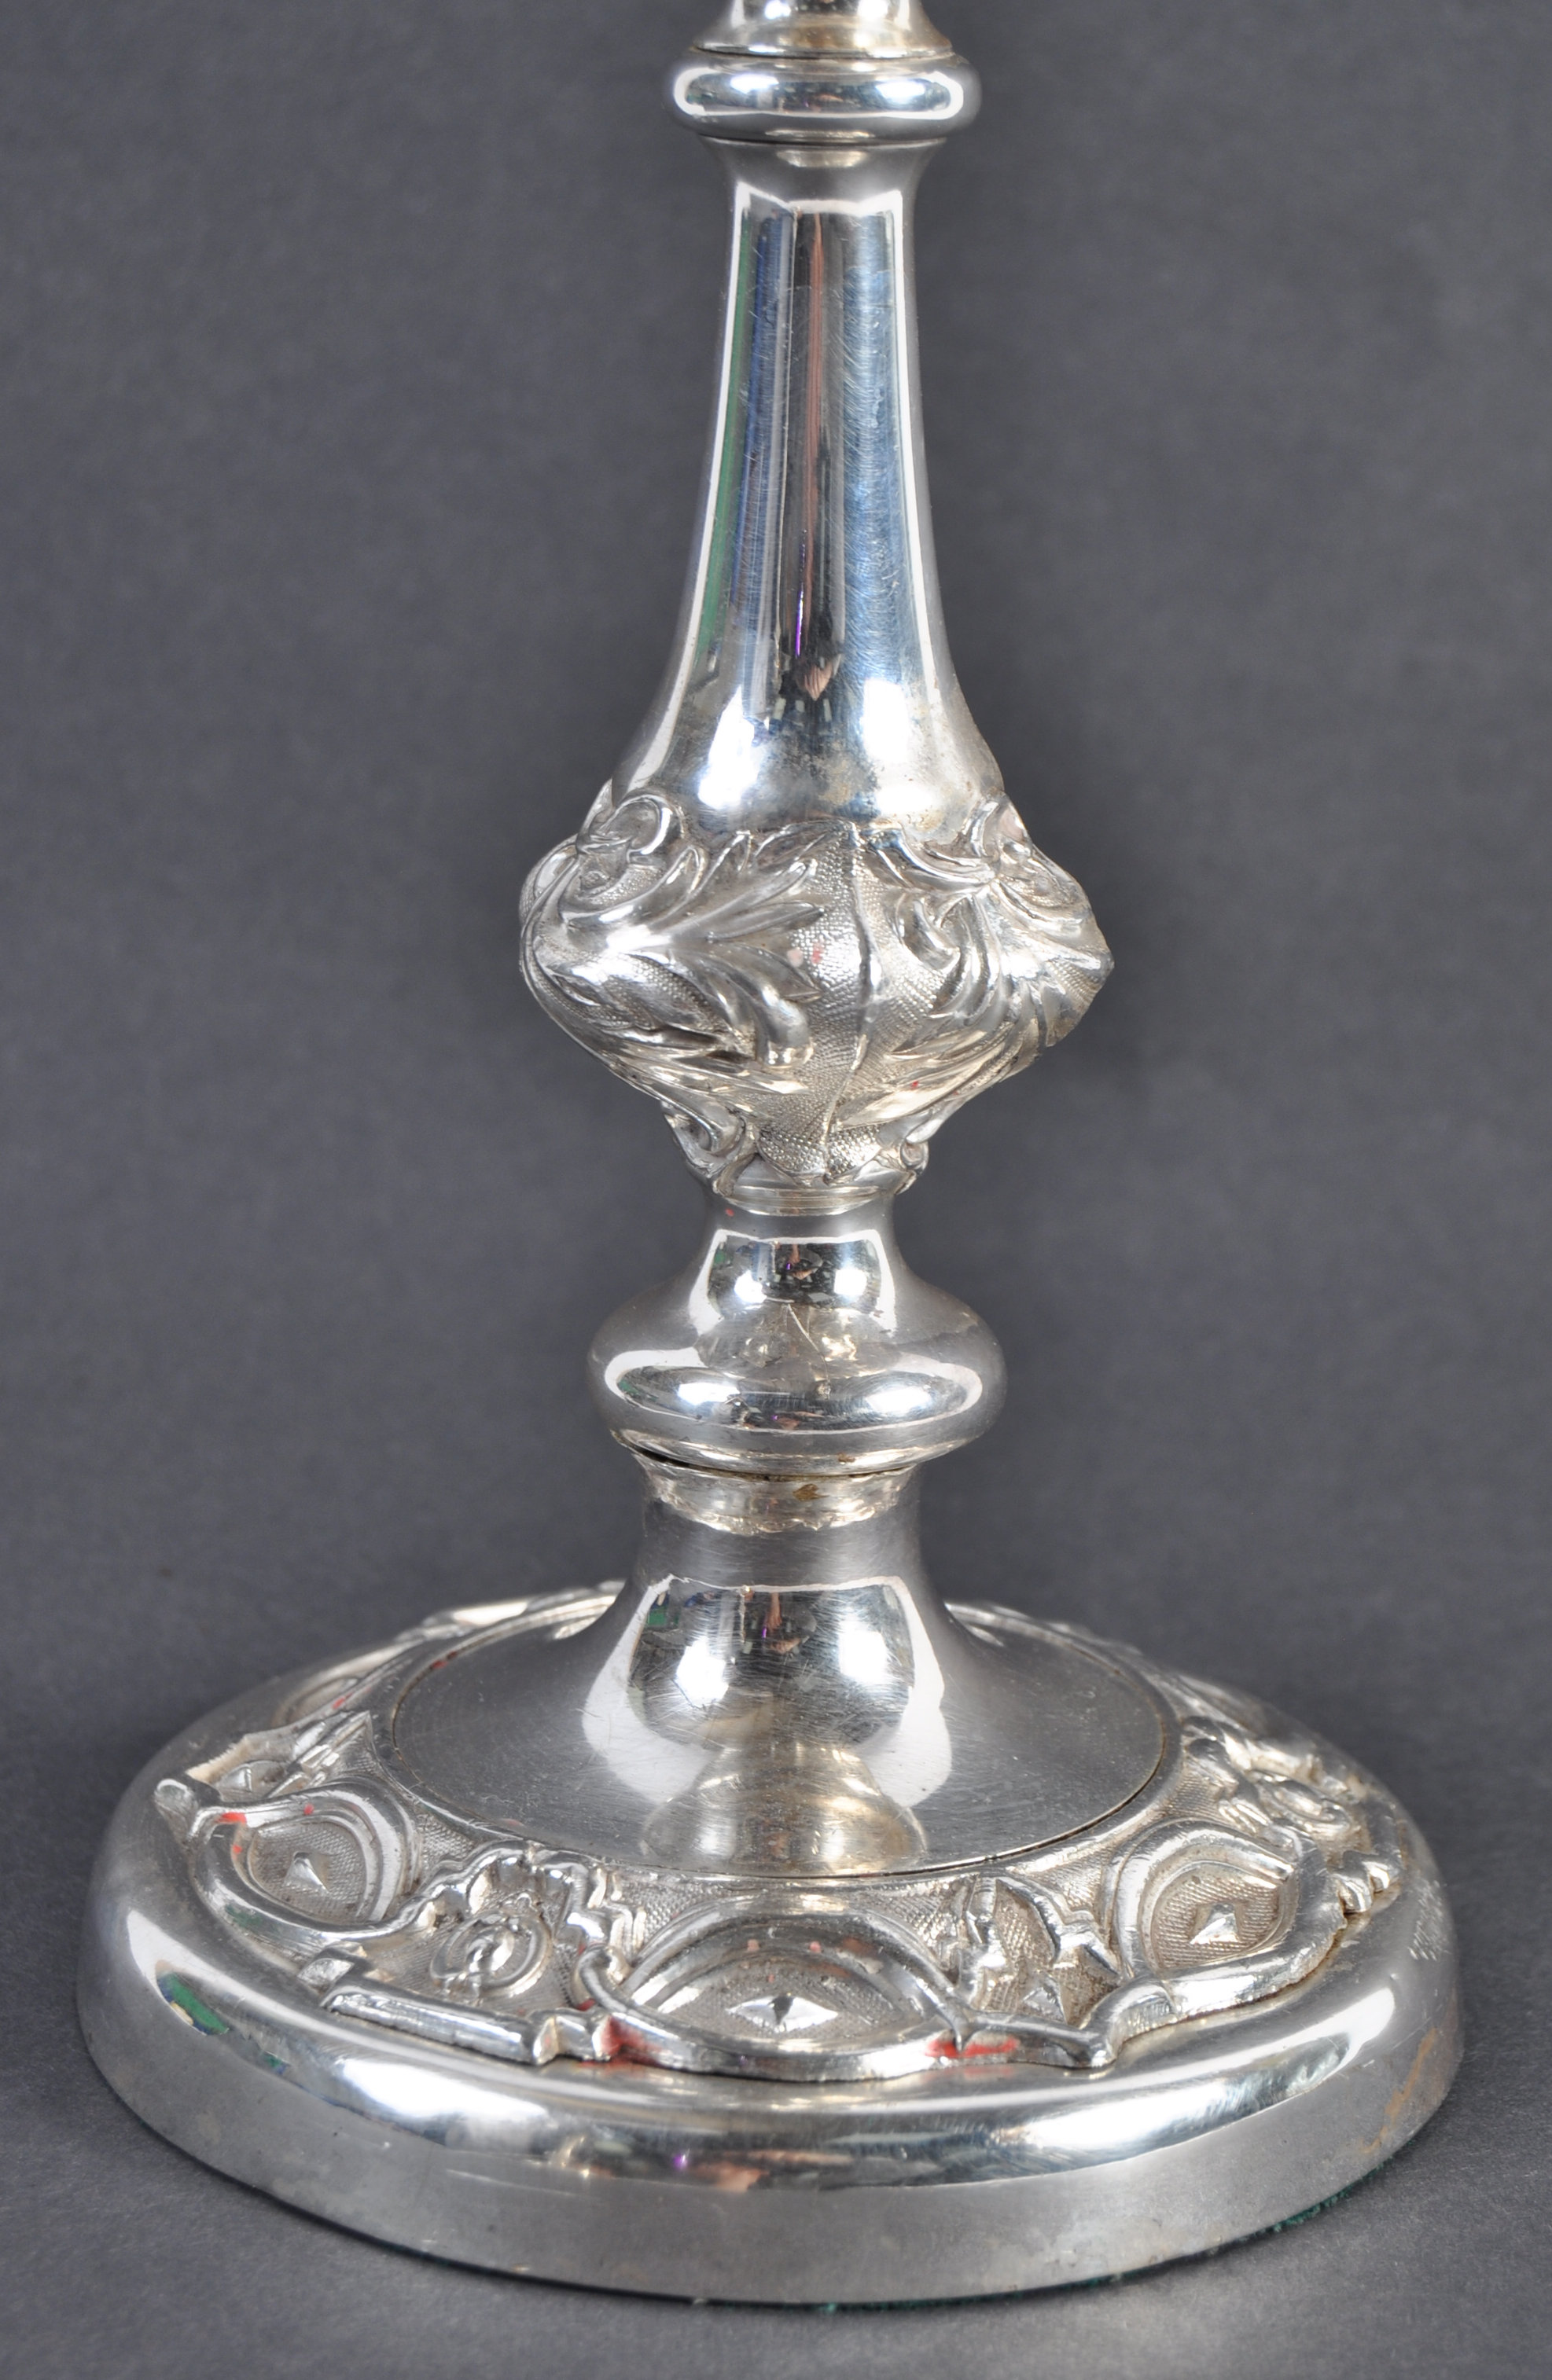 PAIR OF 19TH CENTURY SILVER WARRANTED TABLE CANDLESTICKS - Image 5 of 6